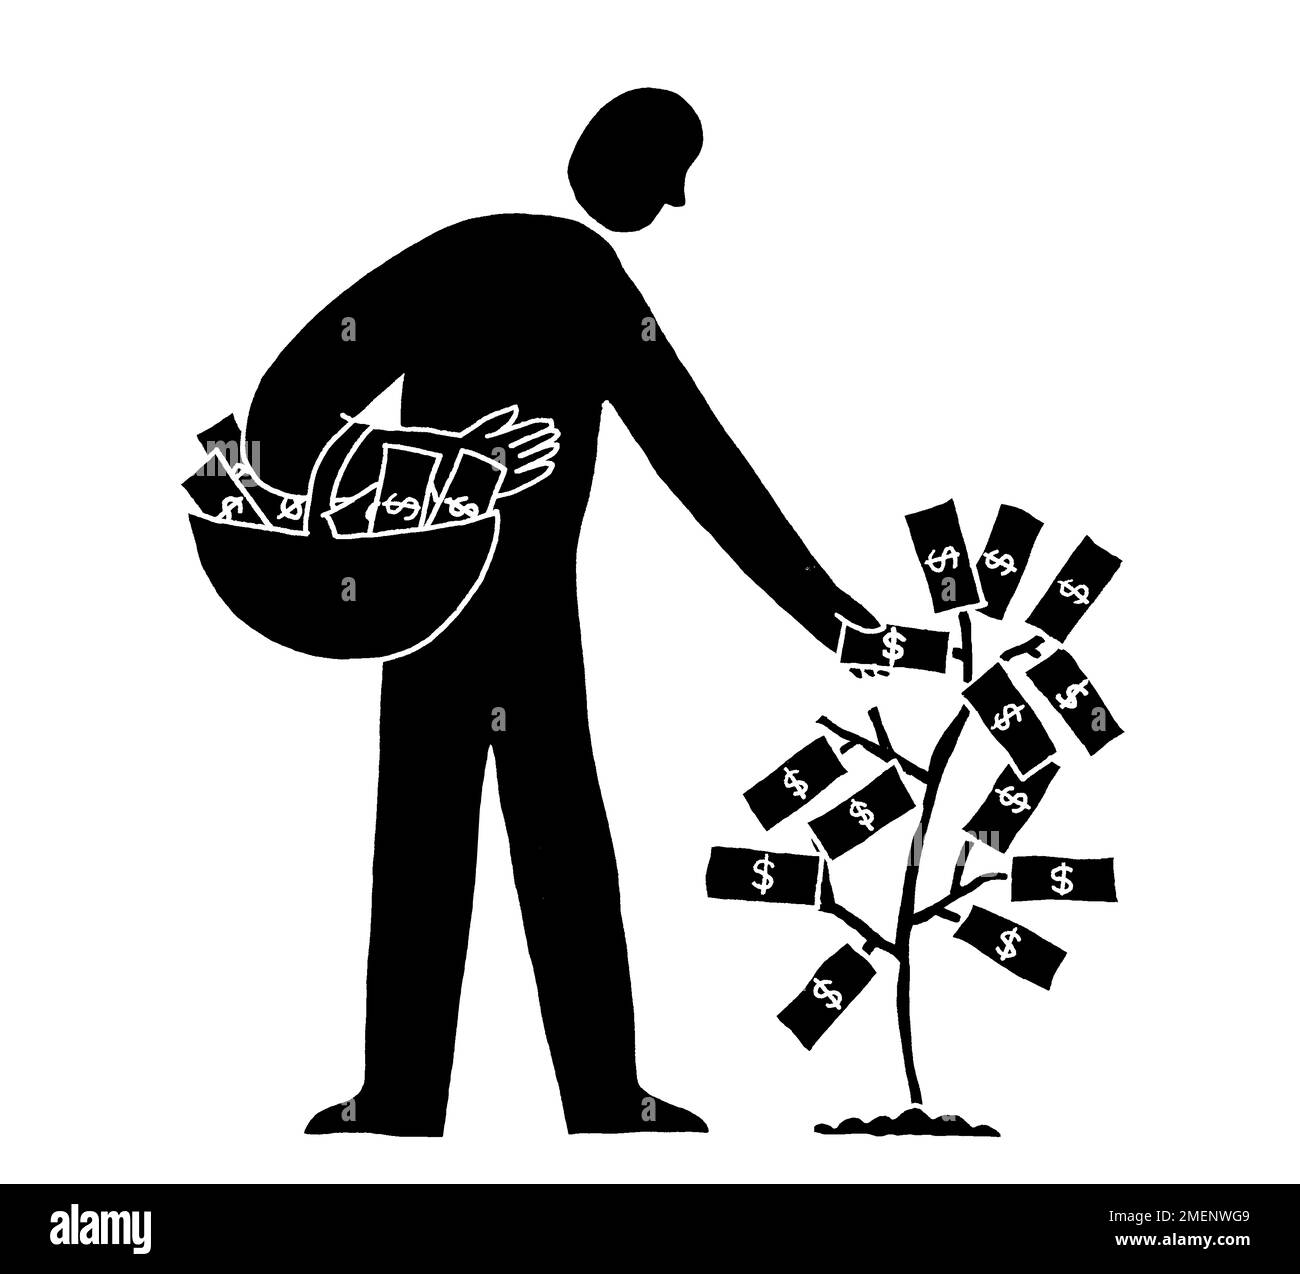 Black and white illustration of money growing on tree with a man picking the notes and placing them into a basket Stock Photo